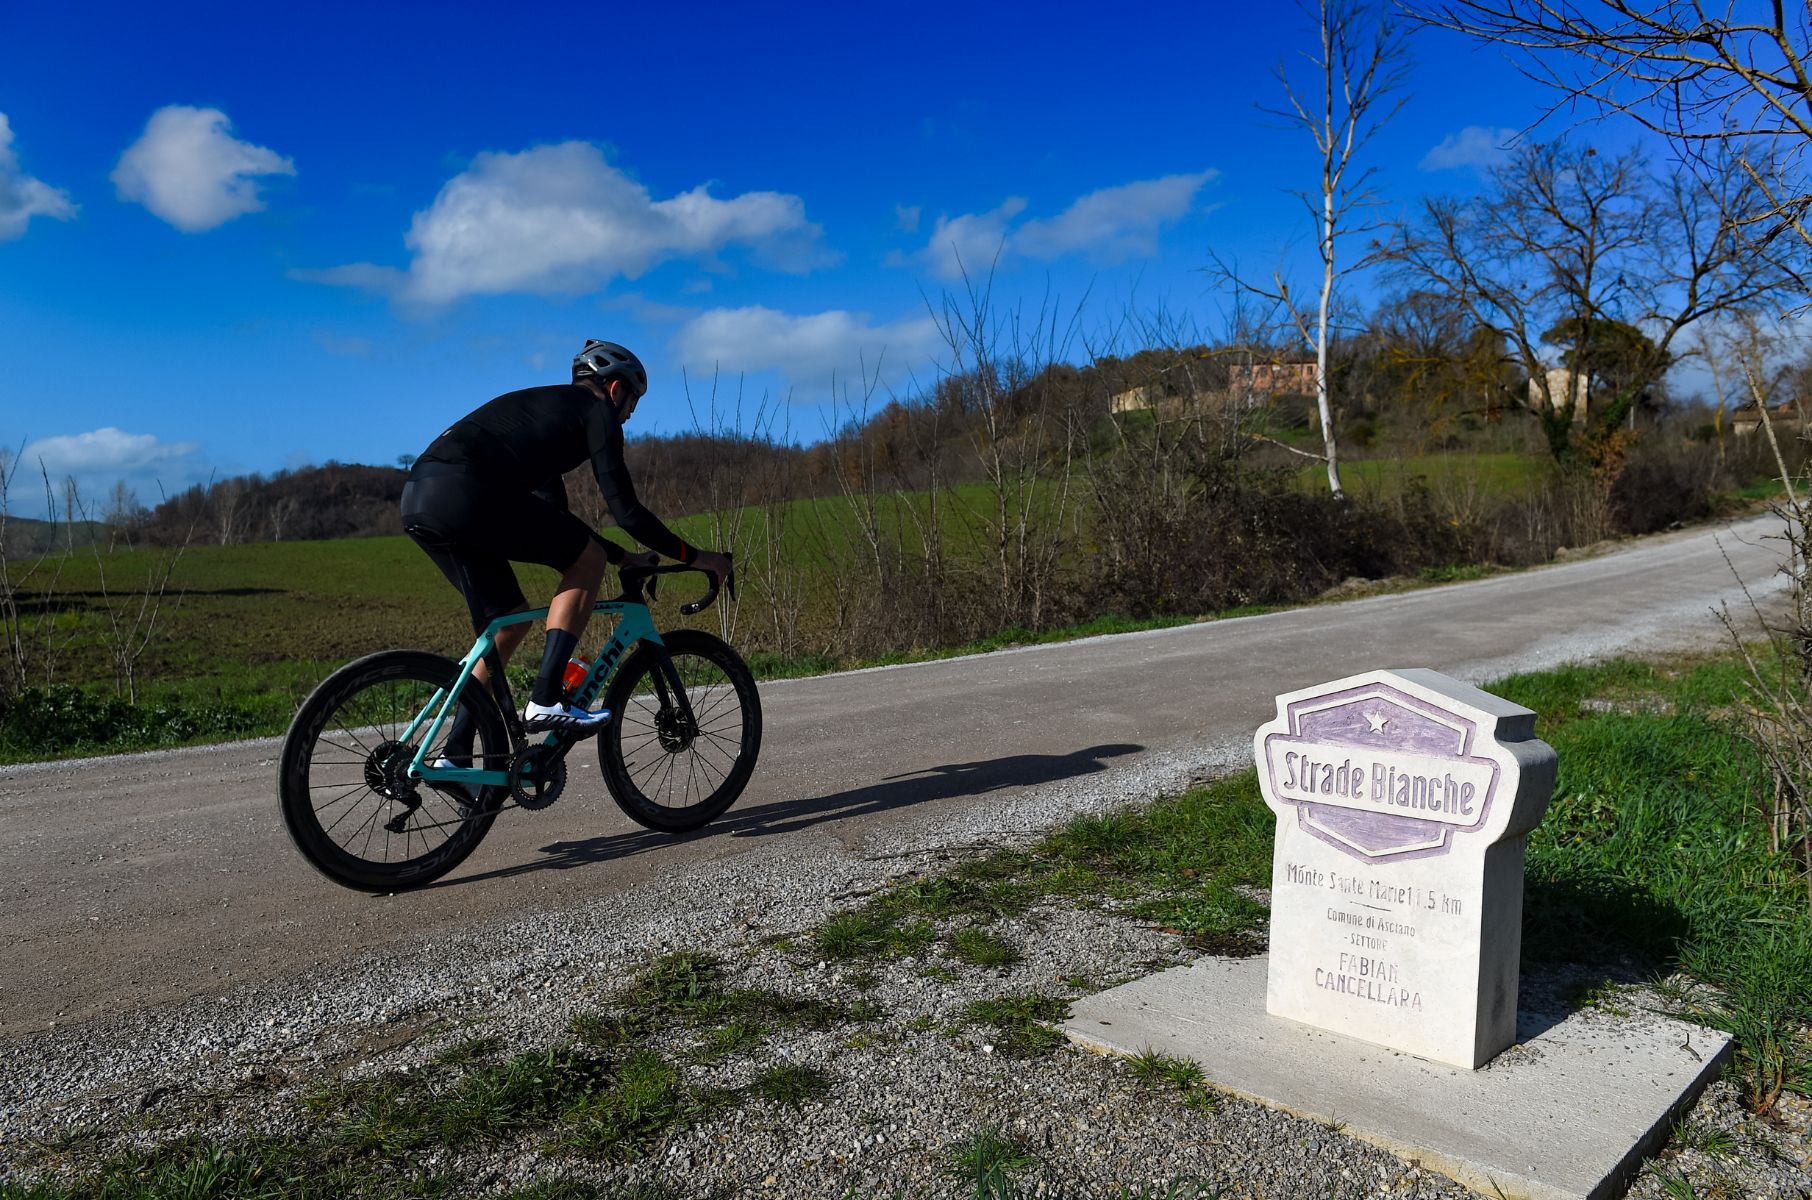 Focus on the 3 key gravel sectors: San Martino in Grania, Monte Sante Marie and Le Tolfe.